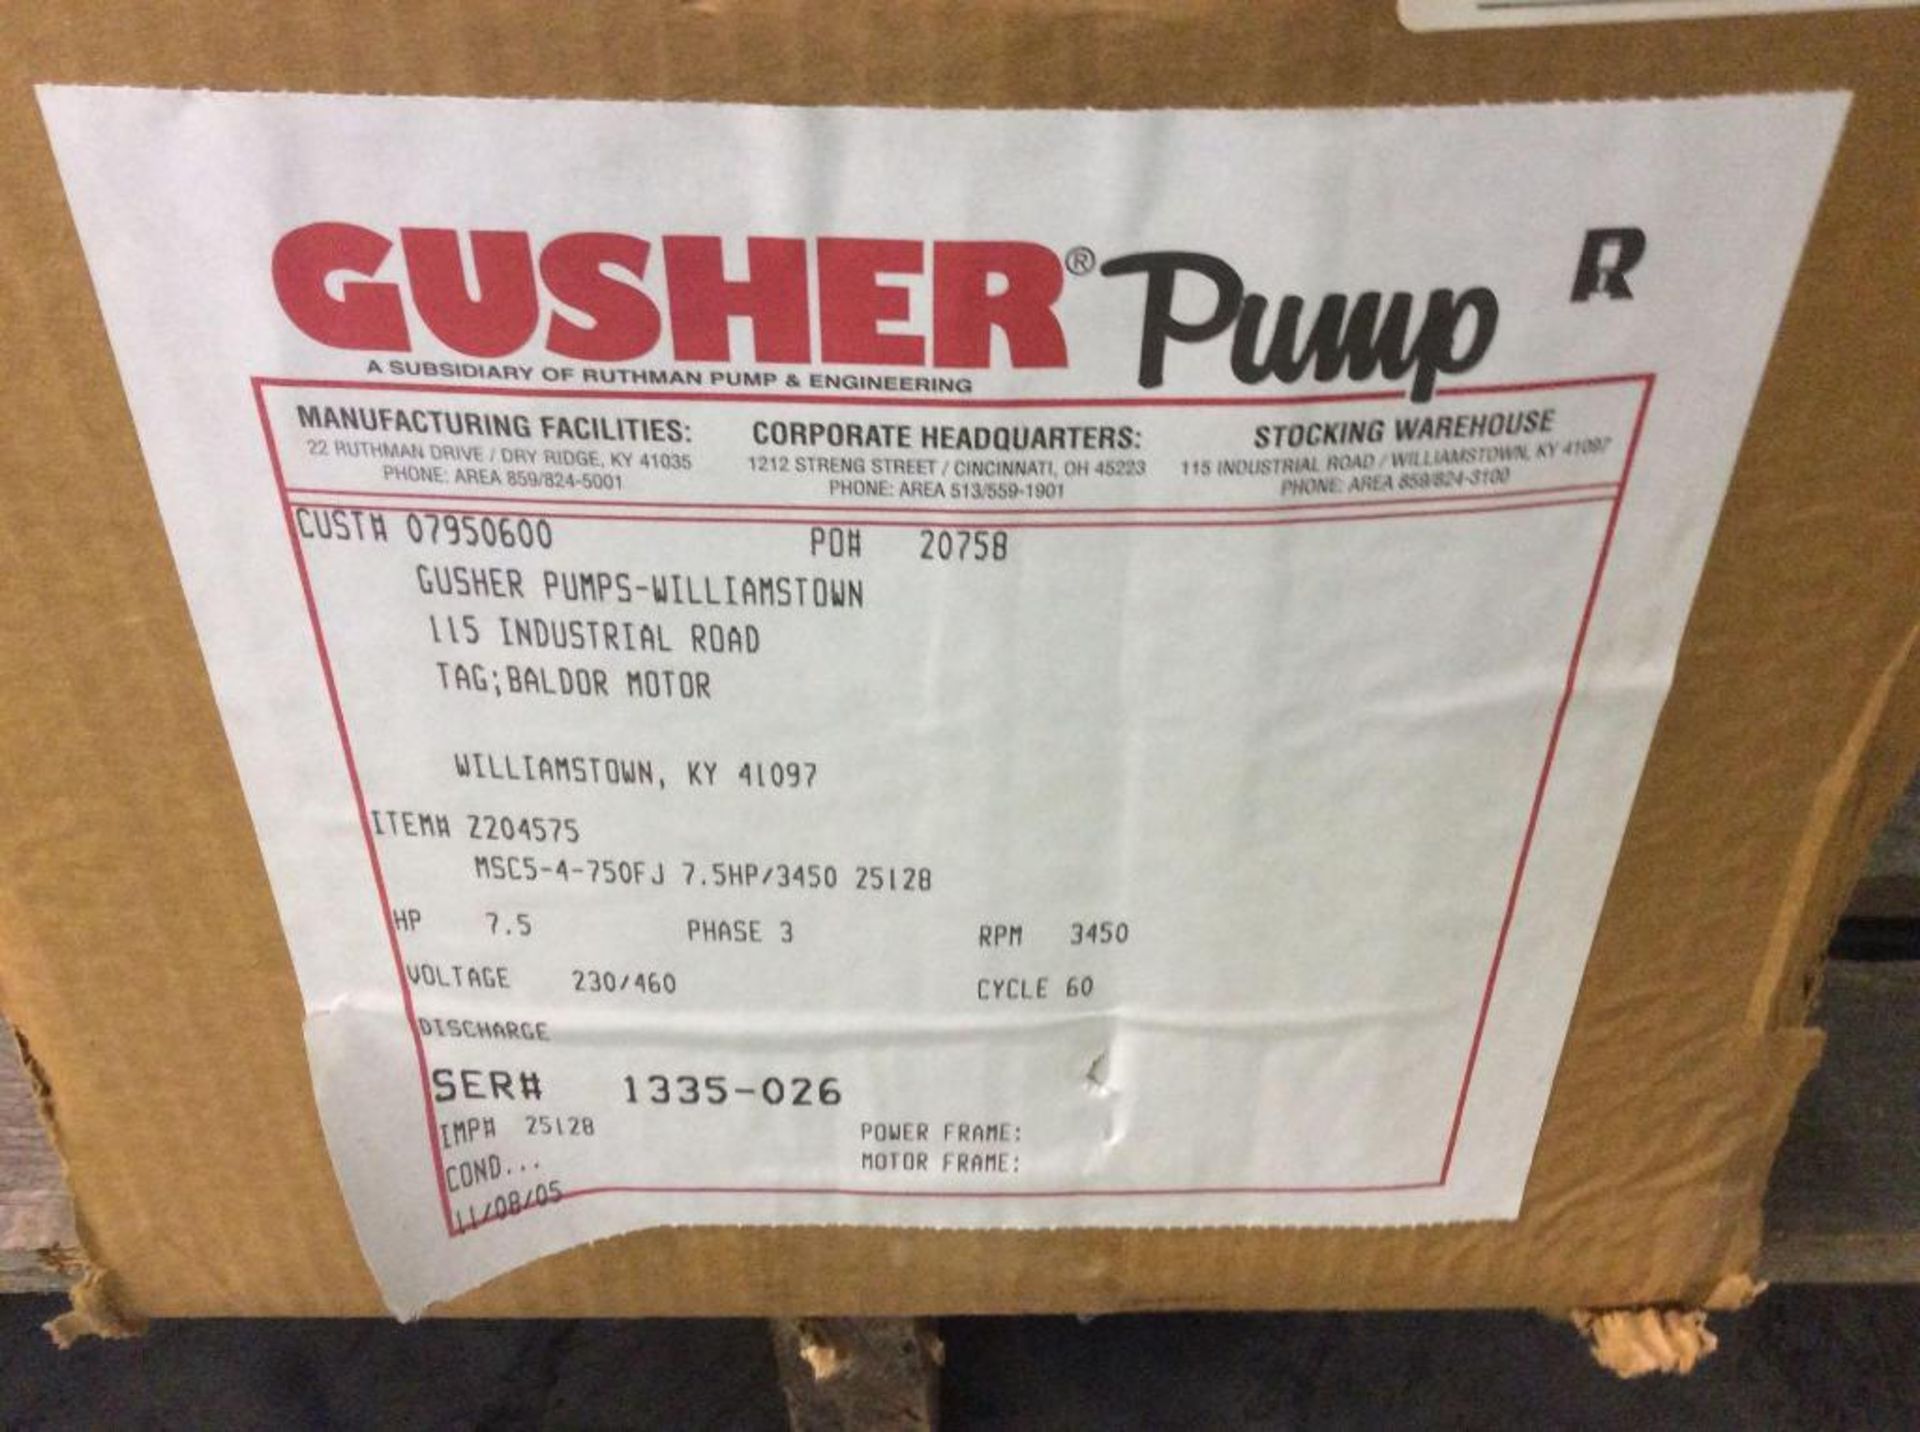 Gusher 7.5 hp pump, mn MSC5-4-750FJ, 3450 rpm, 3 phase (NEW IN BOX) - Image 2 of 2